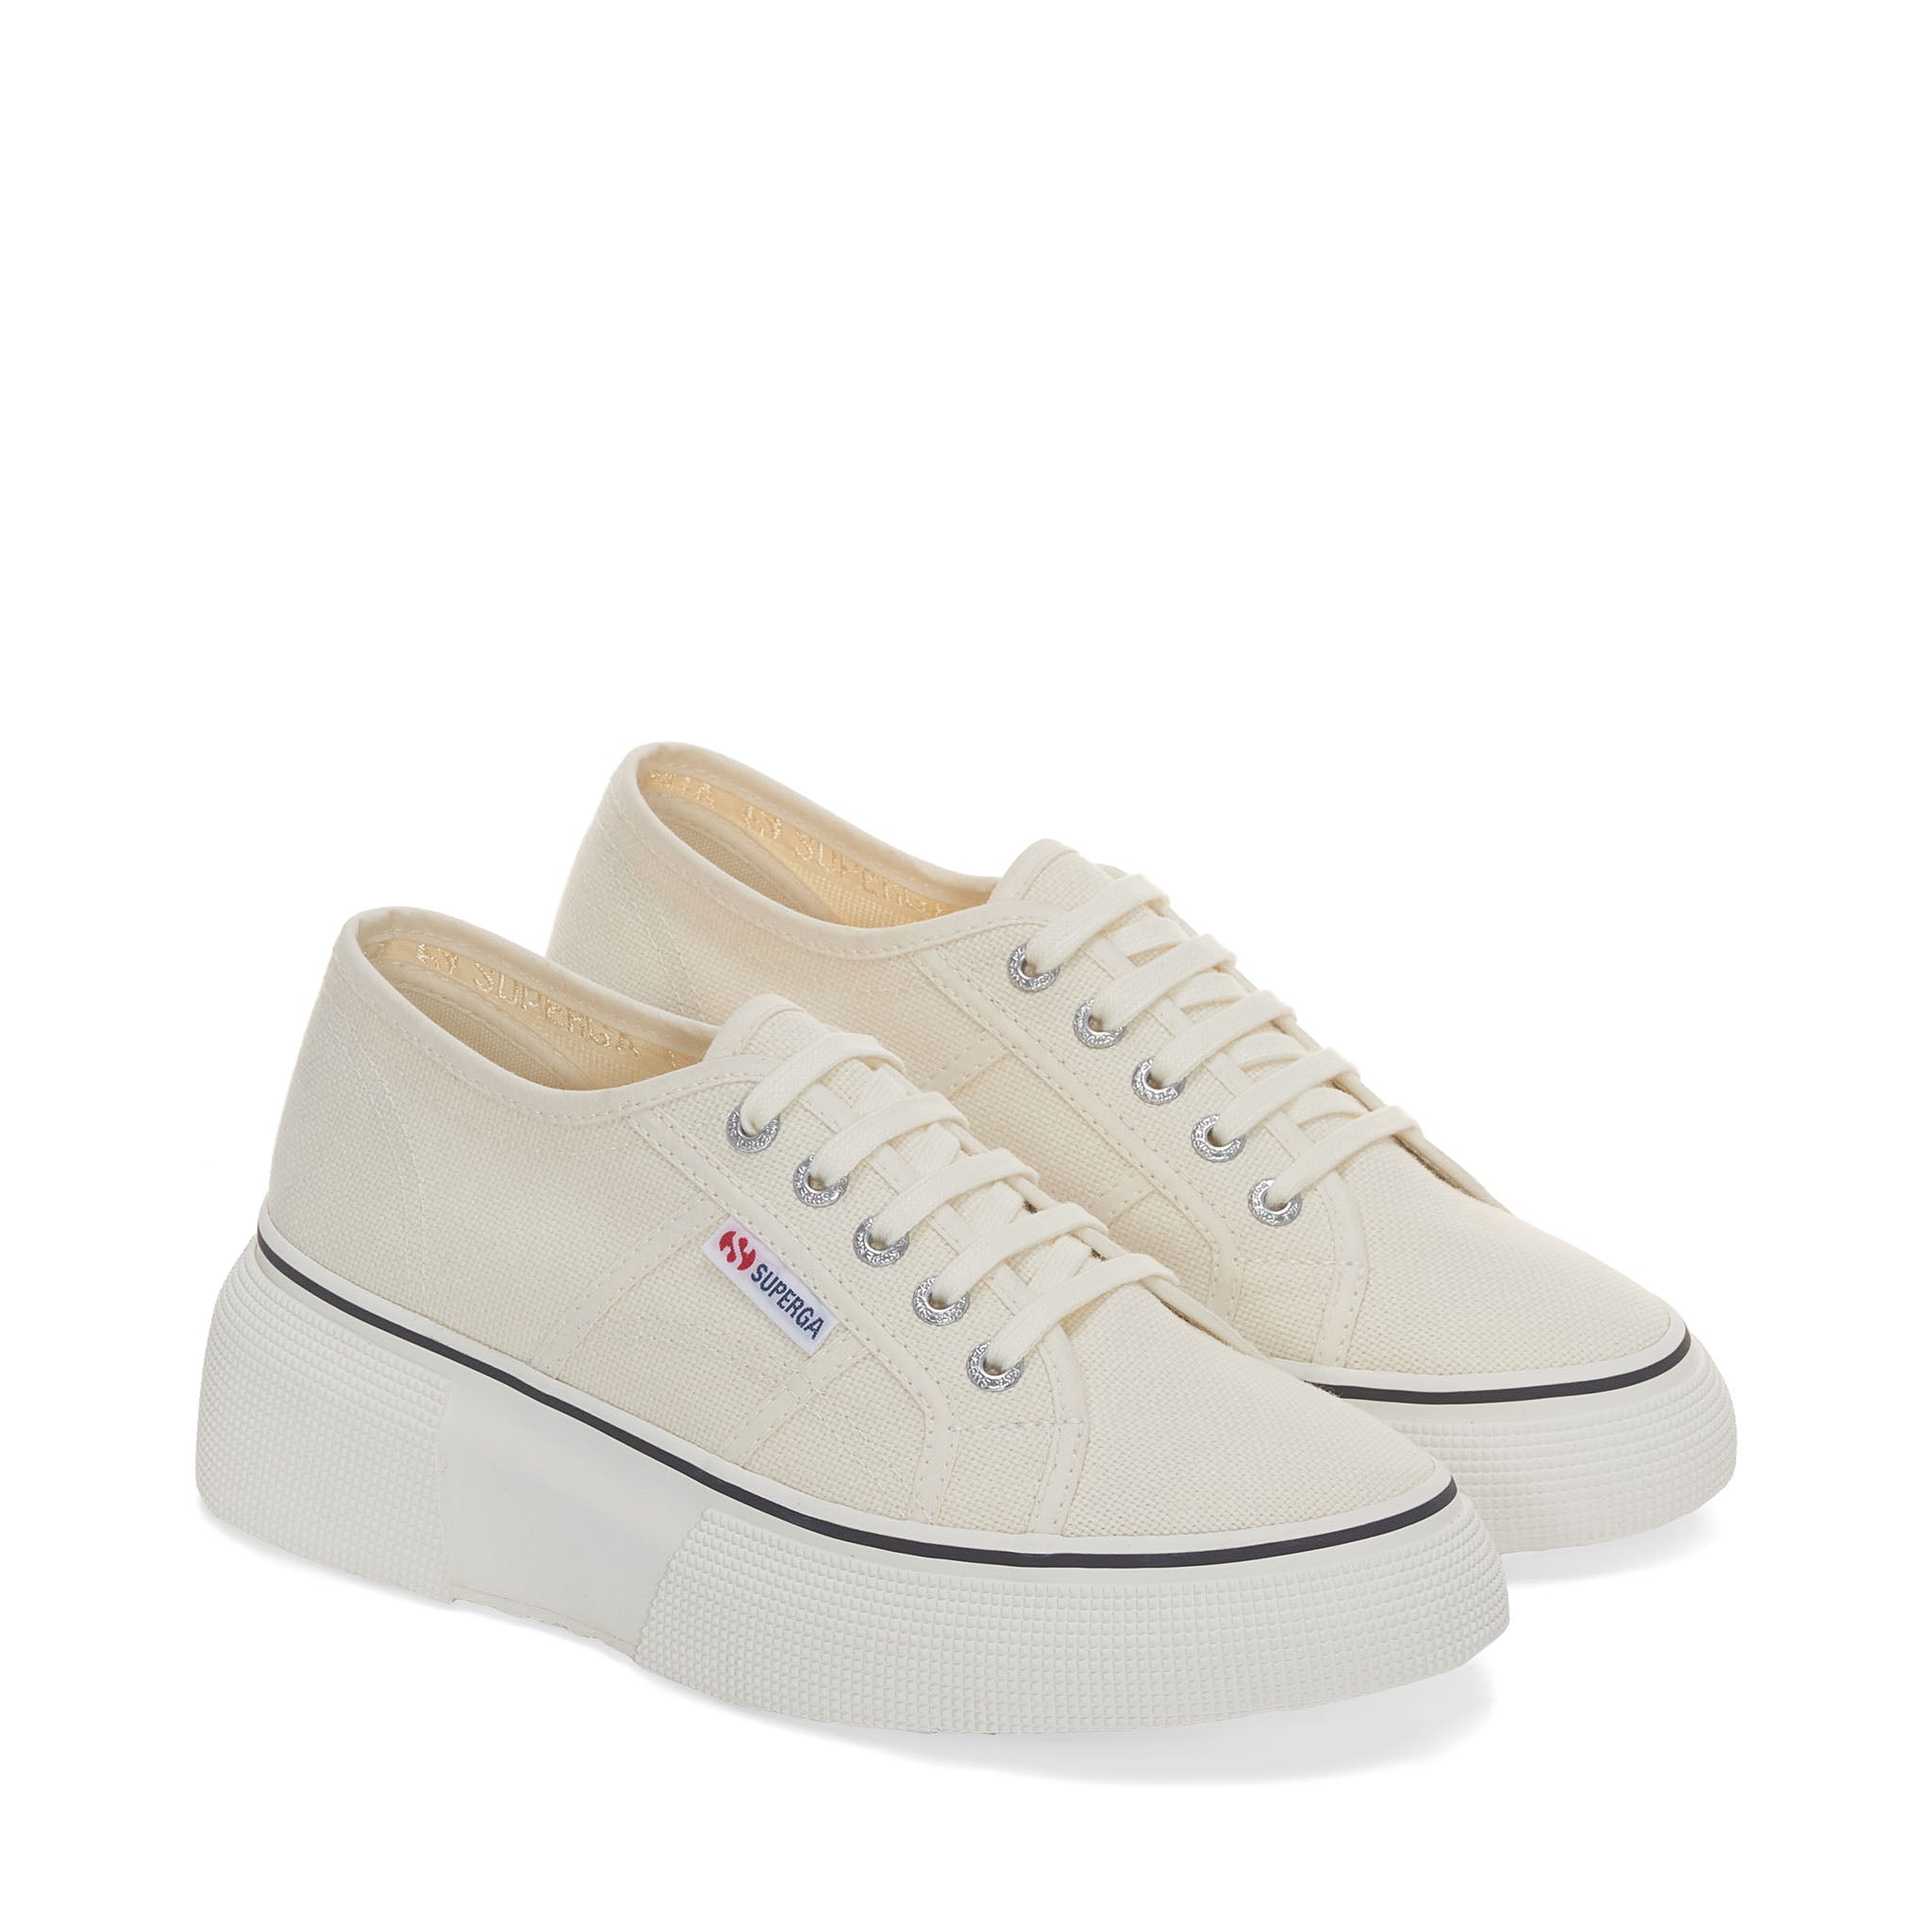 Superga 2287 Bubble Sneakers - Beige Natural Avorio. Front view.